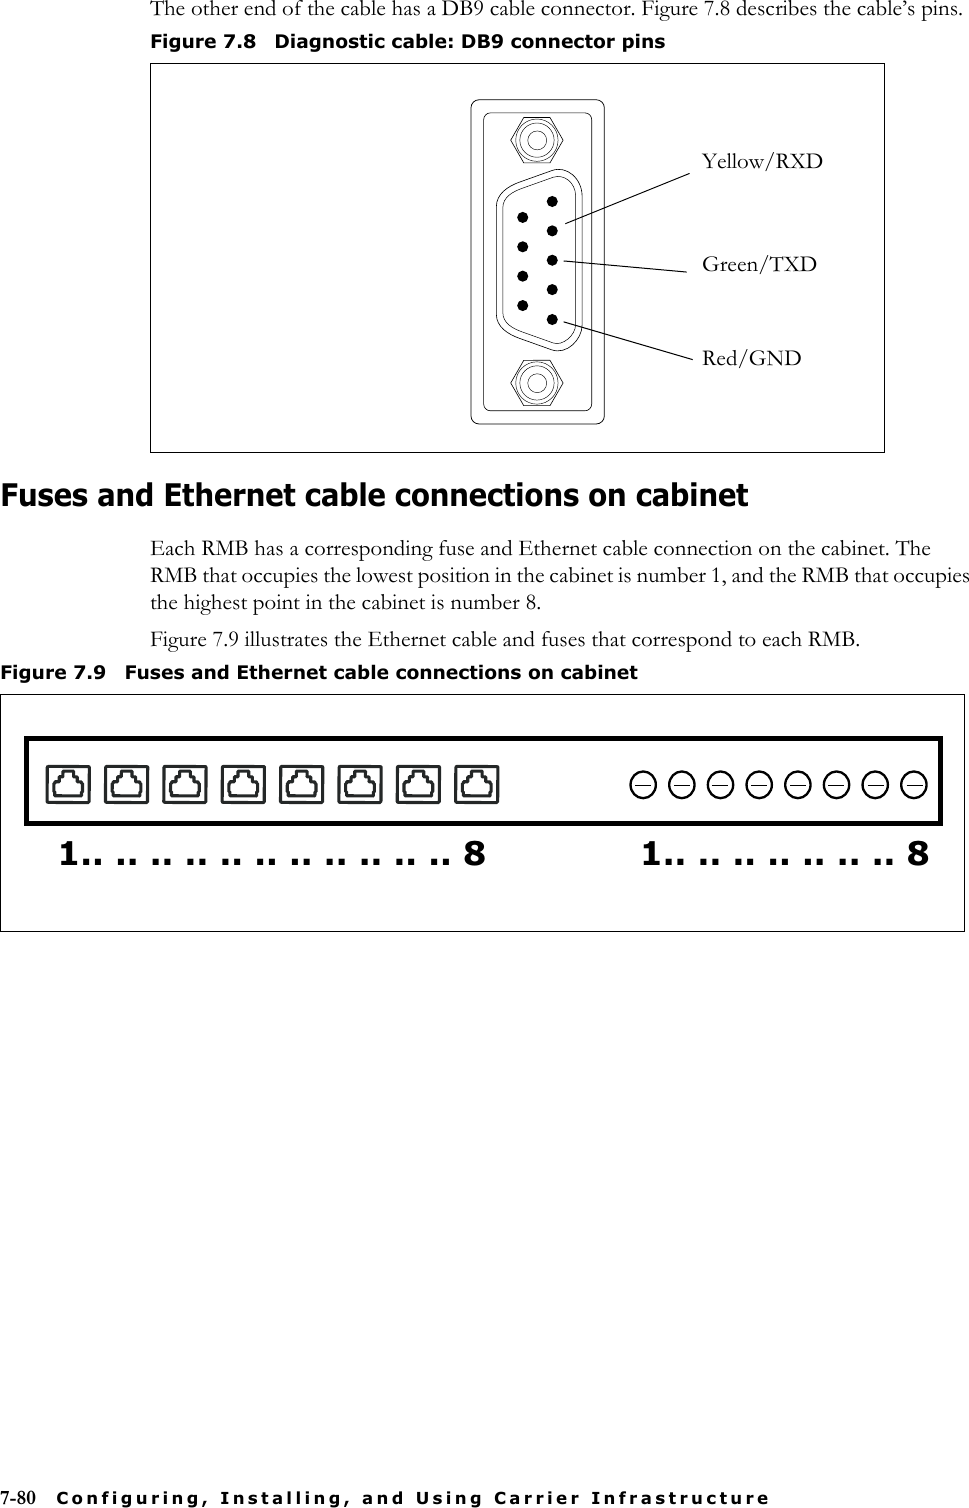 7-80 Configuring, Installing, and Using Carrier InfrastructureThe other end of the cable has a DB9 cable connector. Figure 7.8 describes the cable’s pins.Fuses and Ethernet cable connections on cabinetEach RMB has a corresponding fuse and Ethernet cable connection on the cabinet. The RMB that occupies the lowest position in the cabinet is number 1, and the RMB that occupies the highest point in the cabinet is number 8. Figure 7.9 illustrates the Ethernet cable and fuses that correspond to each RMB. Figure 7.8 Diagnostic cable: DB9 connector pinsYellow/RXDGreen/TXDRed/GNDFigure 7.9 Fuses and Ethernet cable connections on cabinet1......................8 1..............8